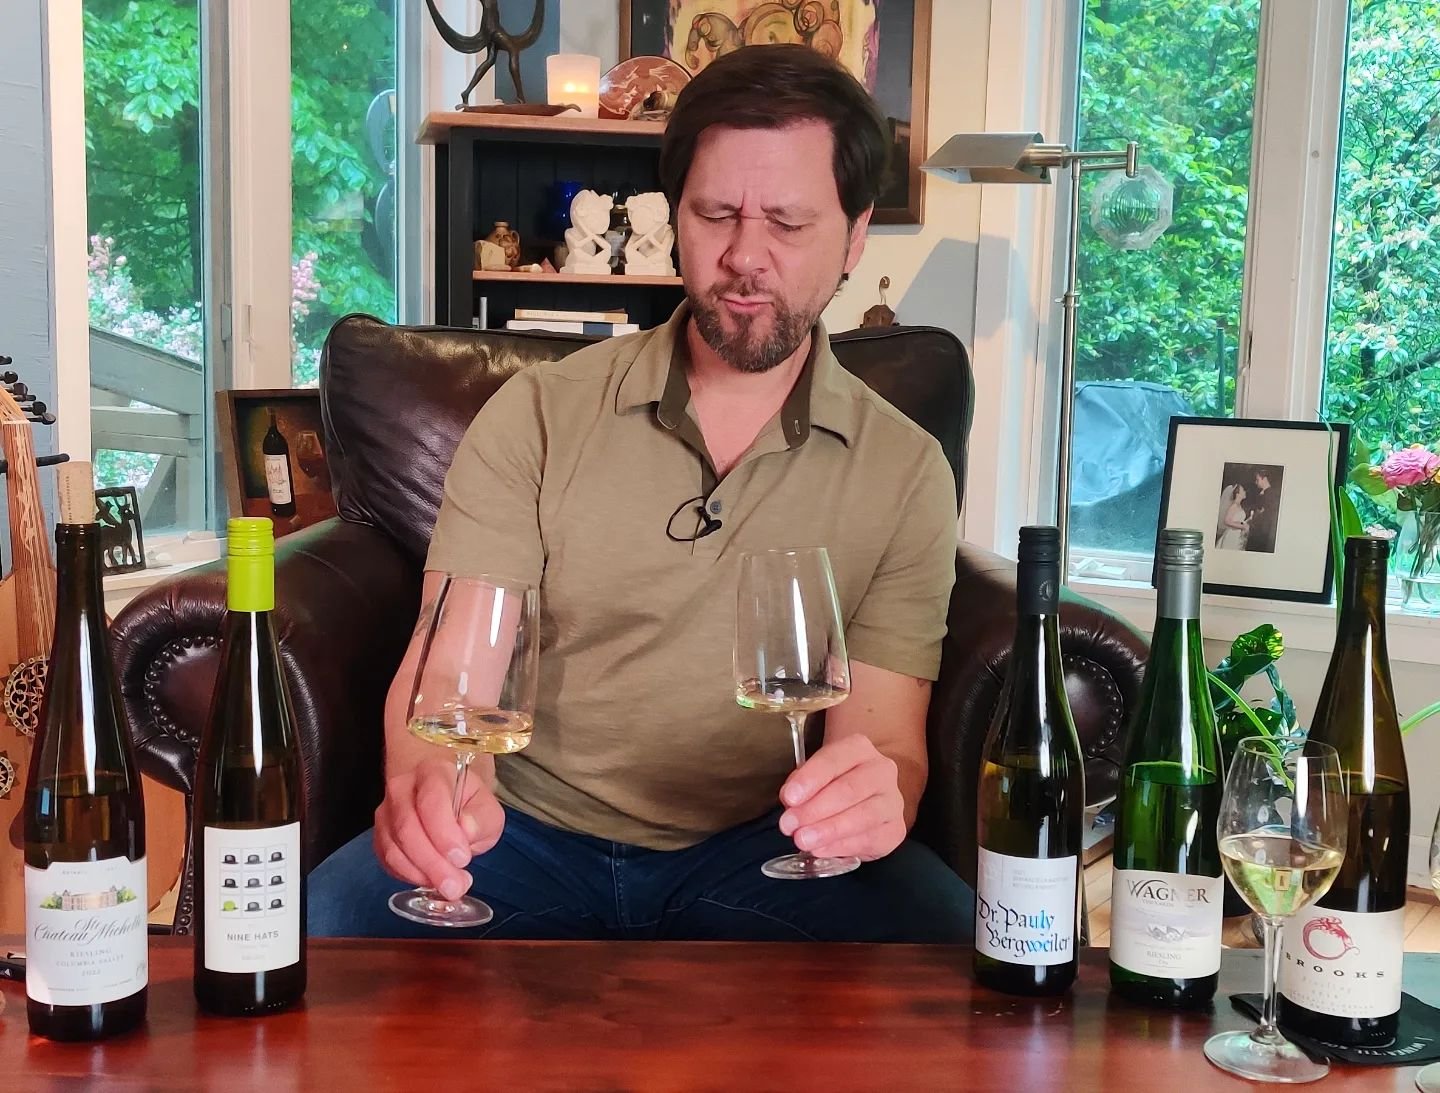 That's a lot of Riesling! Thank you to everybody for weighing in about TDN and gasoline in Riesling yesterday. Video has been shot and will be on the way soon. Let's dive into this controversial topic! #wine #wineinformation #learnaboutwine #sommelie